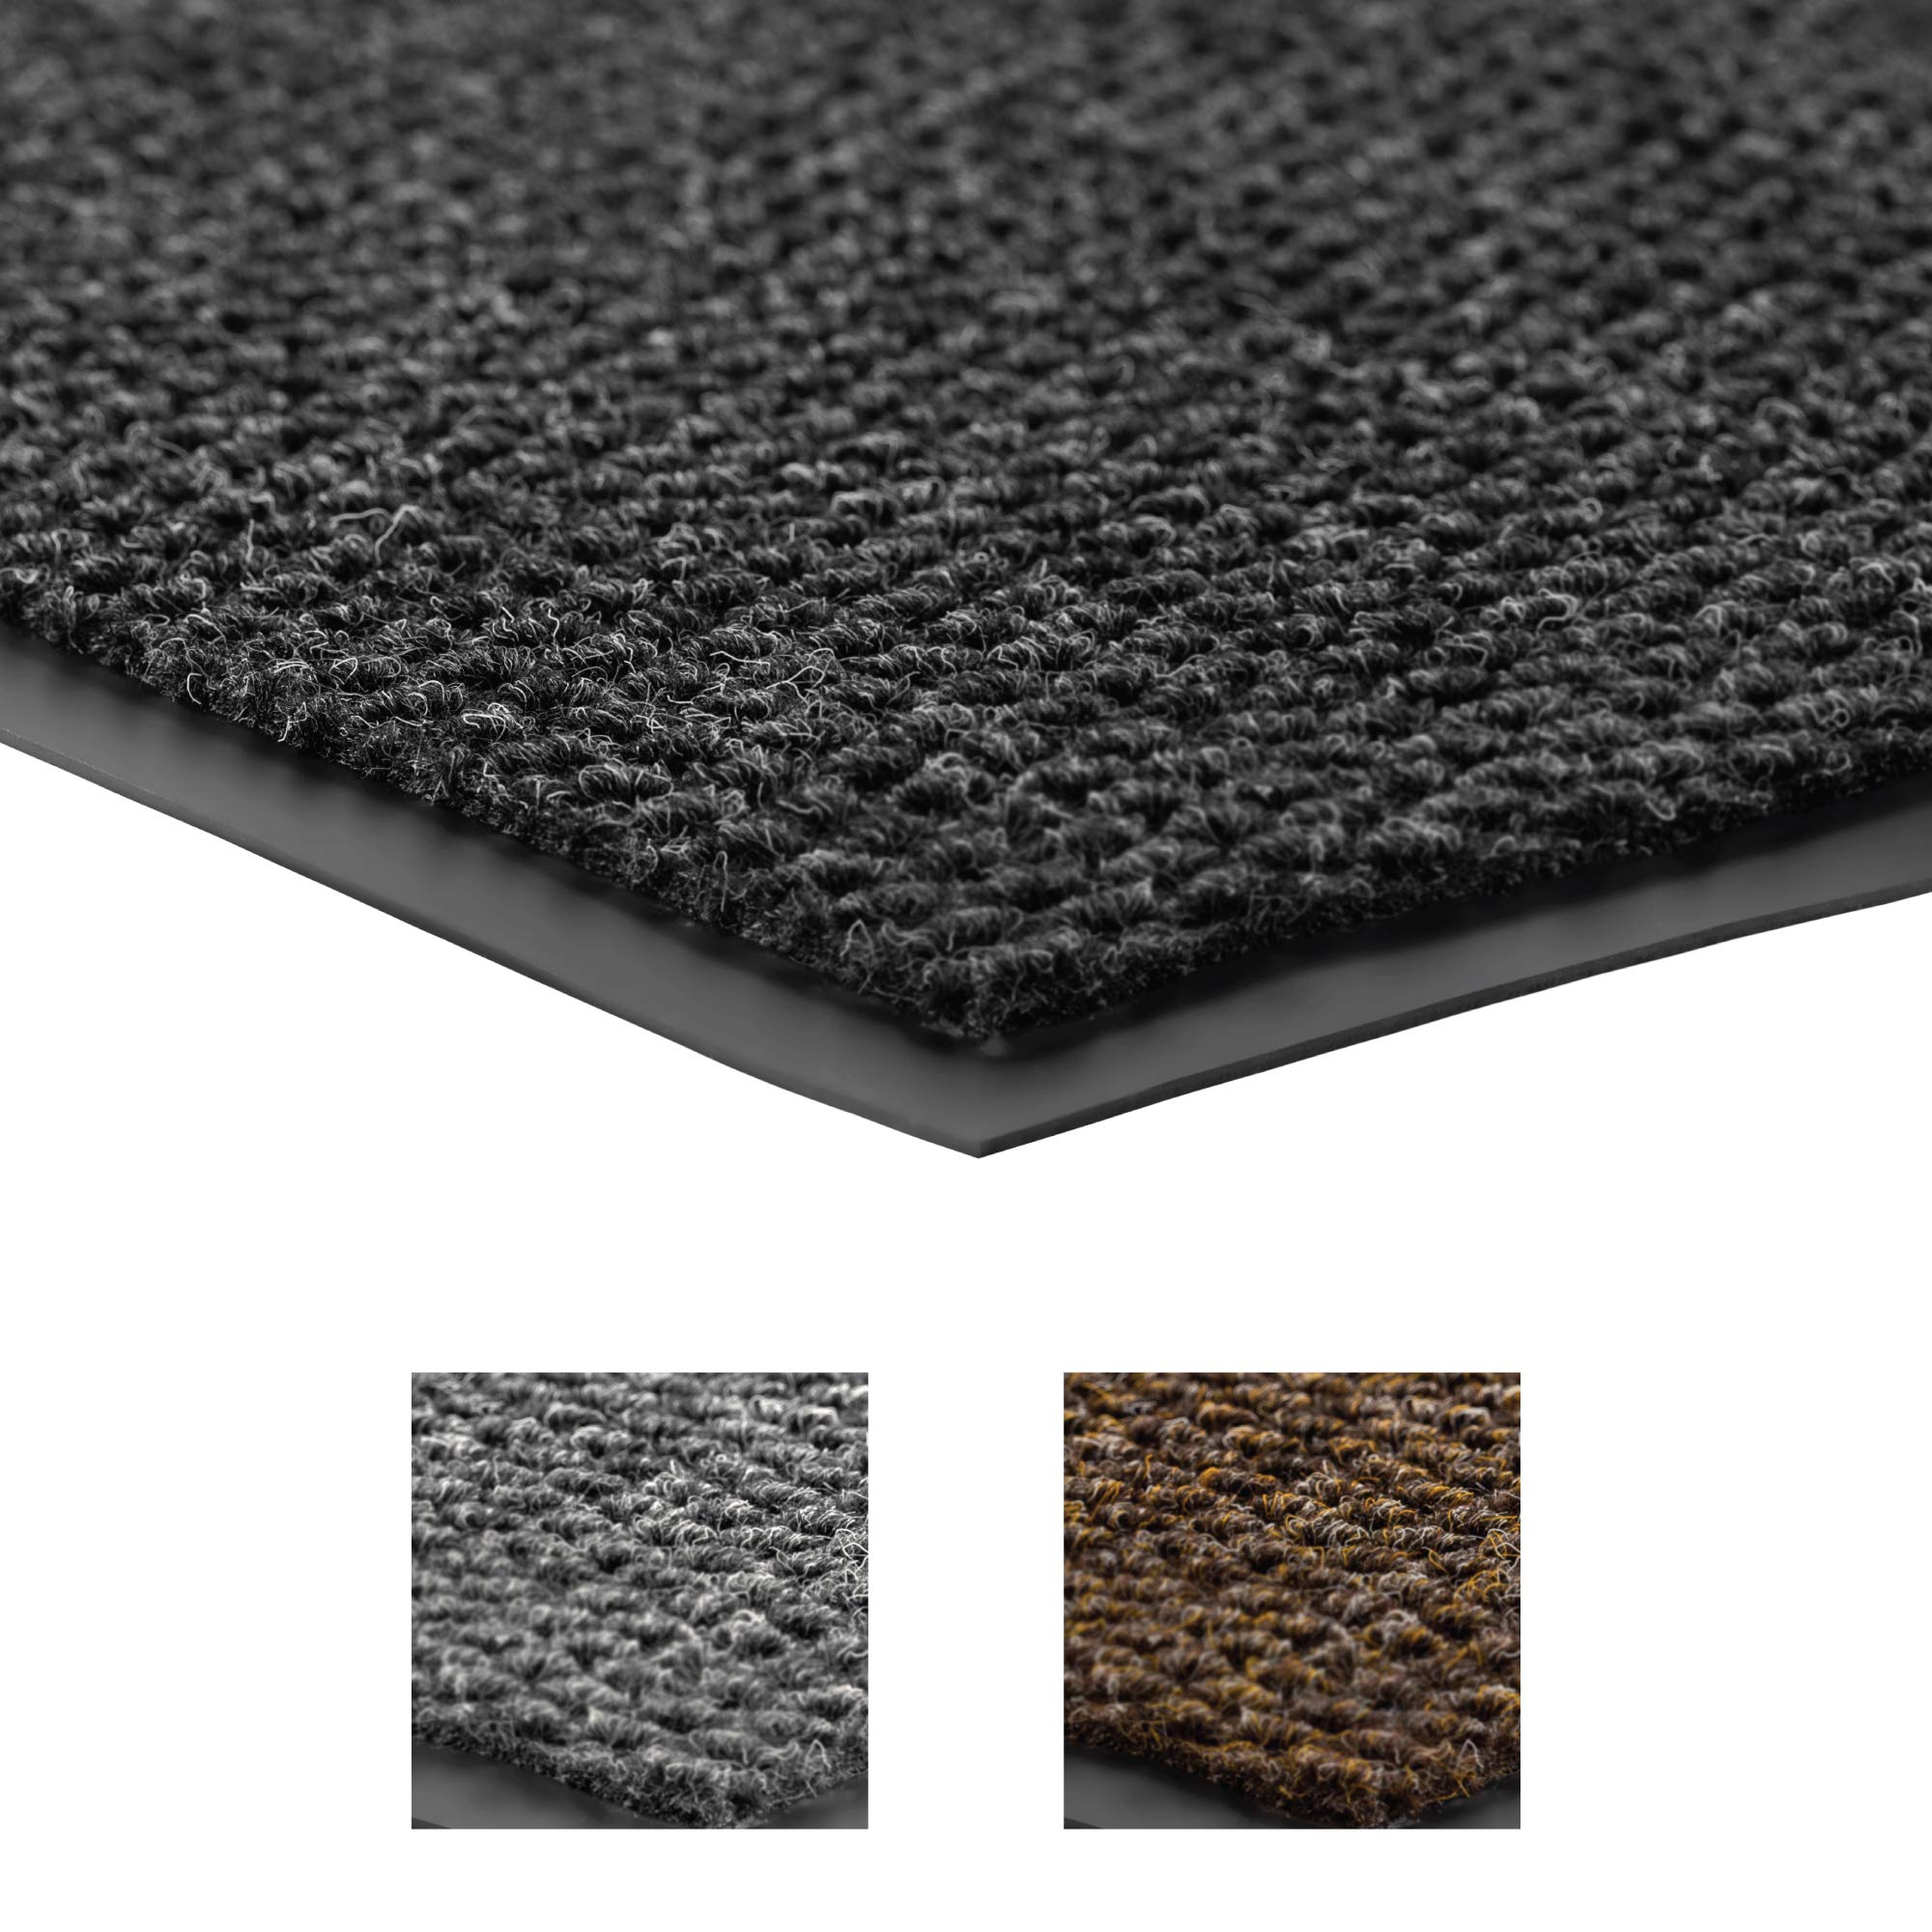 Notrax-136S0034 Carpeted Entrance Mat, Charcoal, 3Ftx4Ft